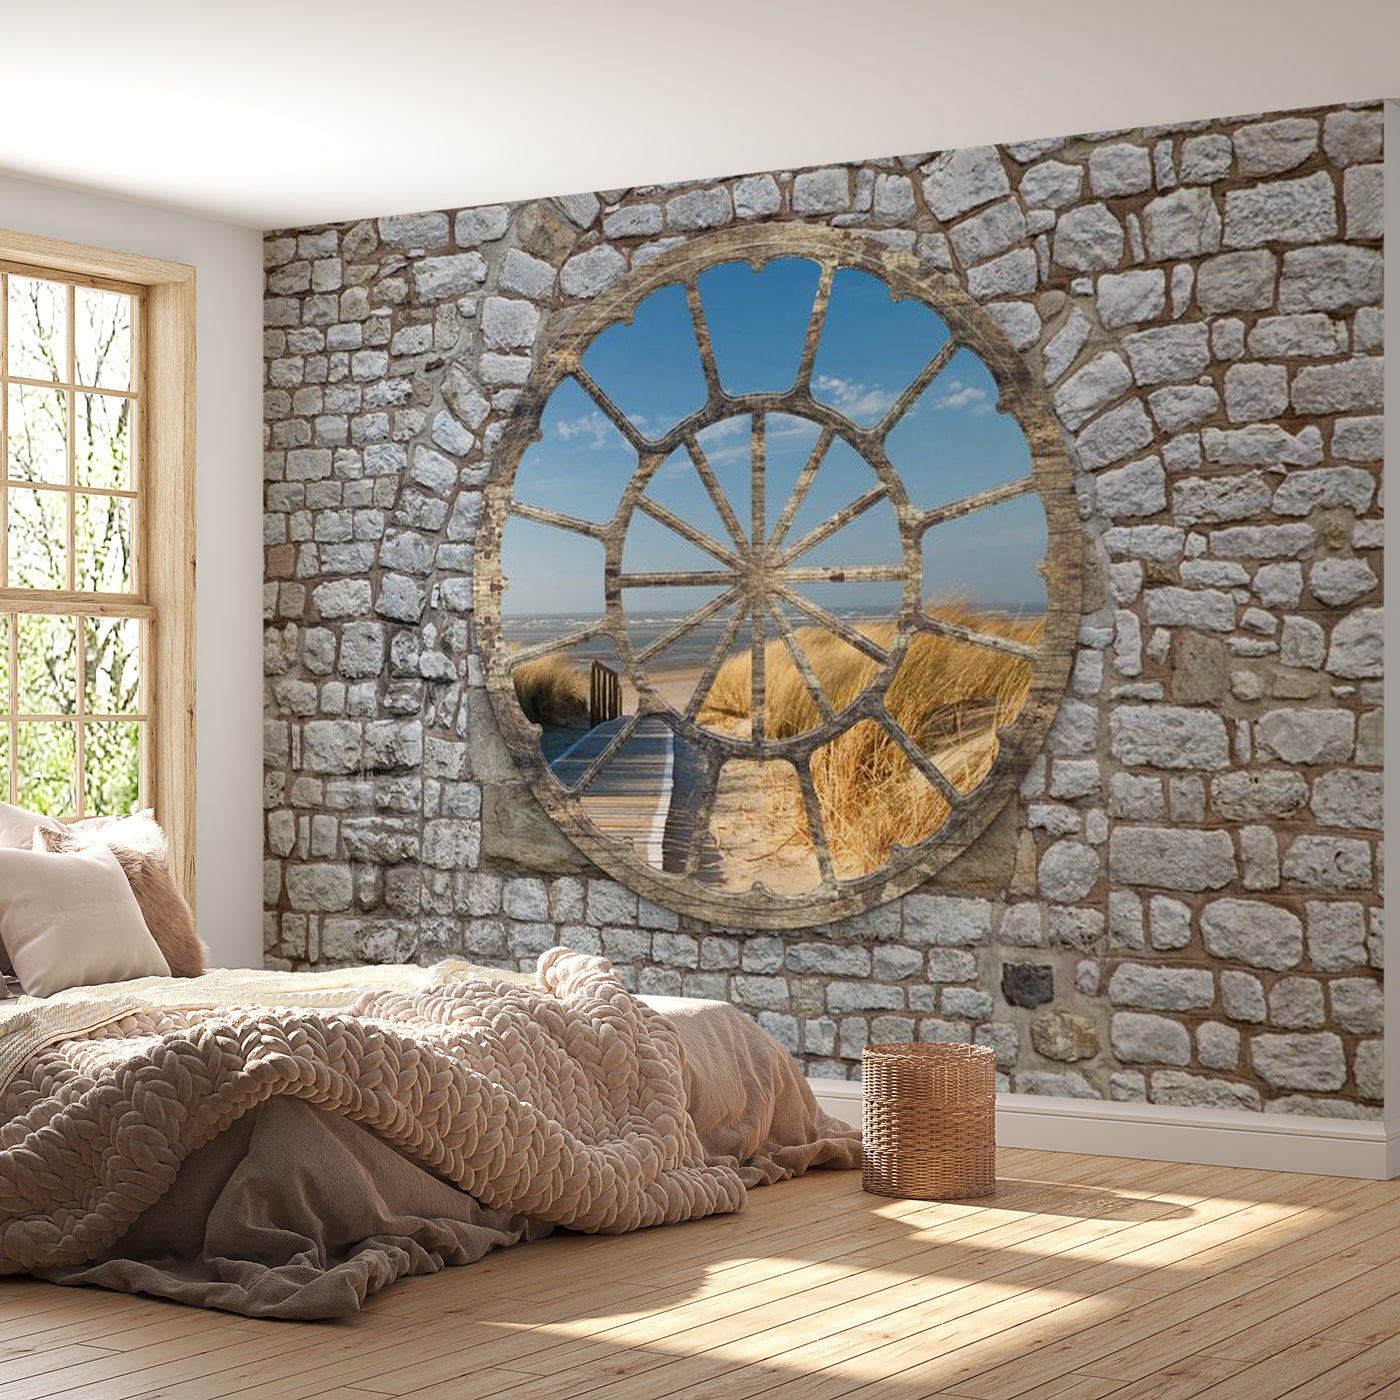 Peel & Stick Beach Wall Mural - Beach Behind The Wall - Removable Wall Decals